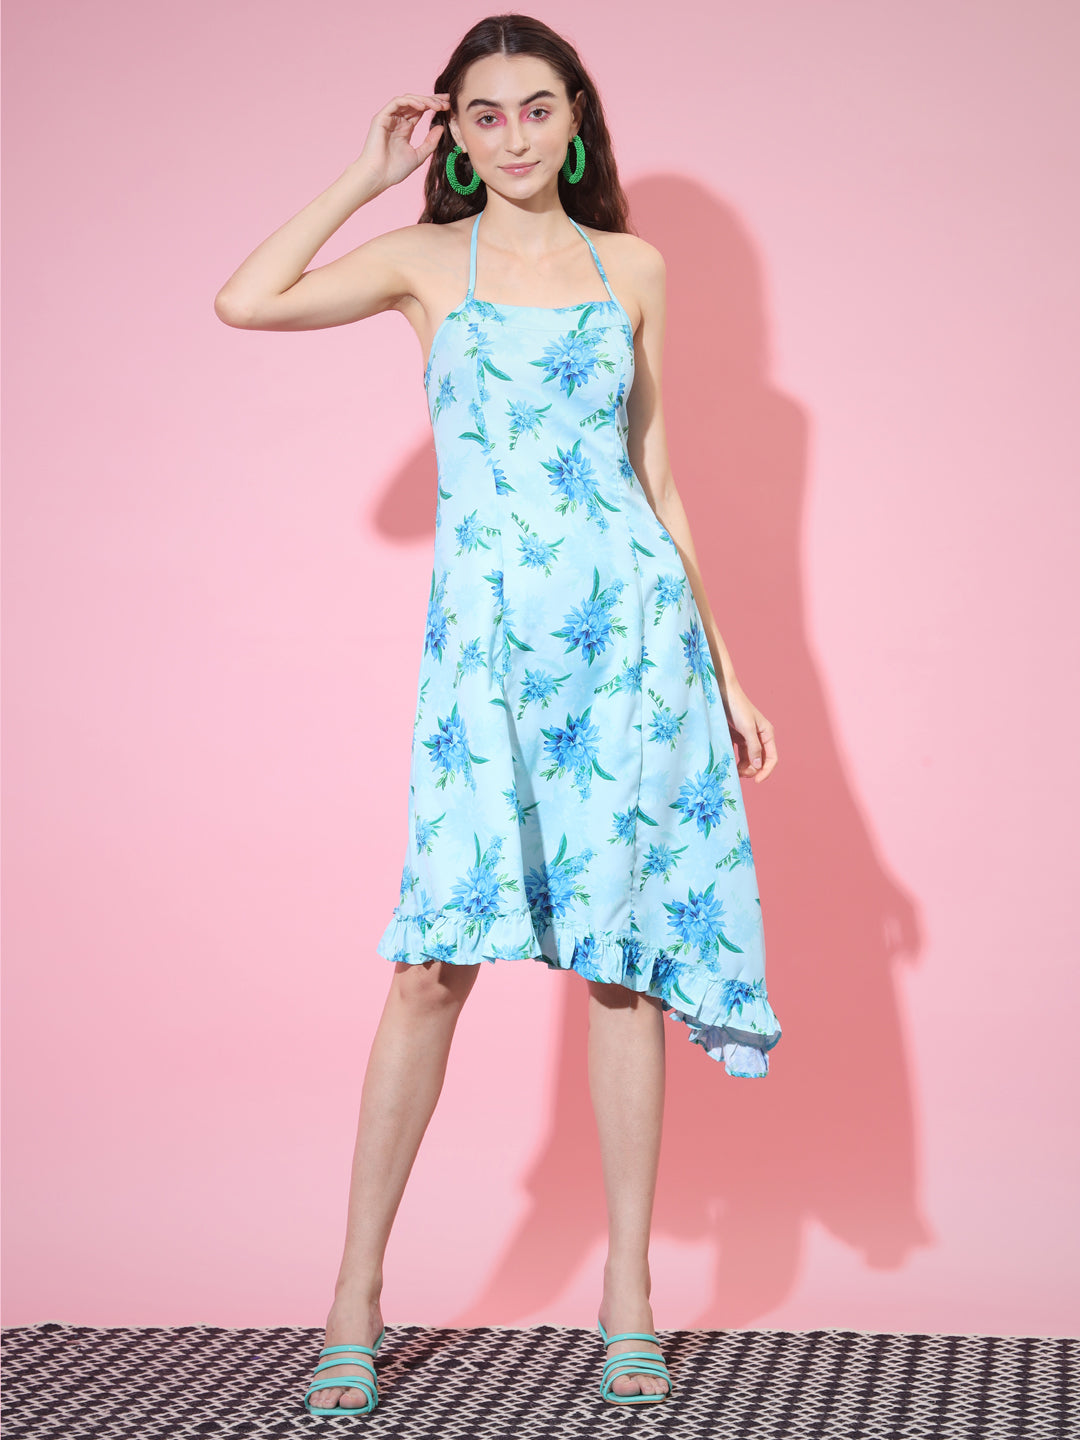 Women's Blue Floral Printed Fit And Flare Dress - Myshka